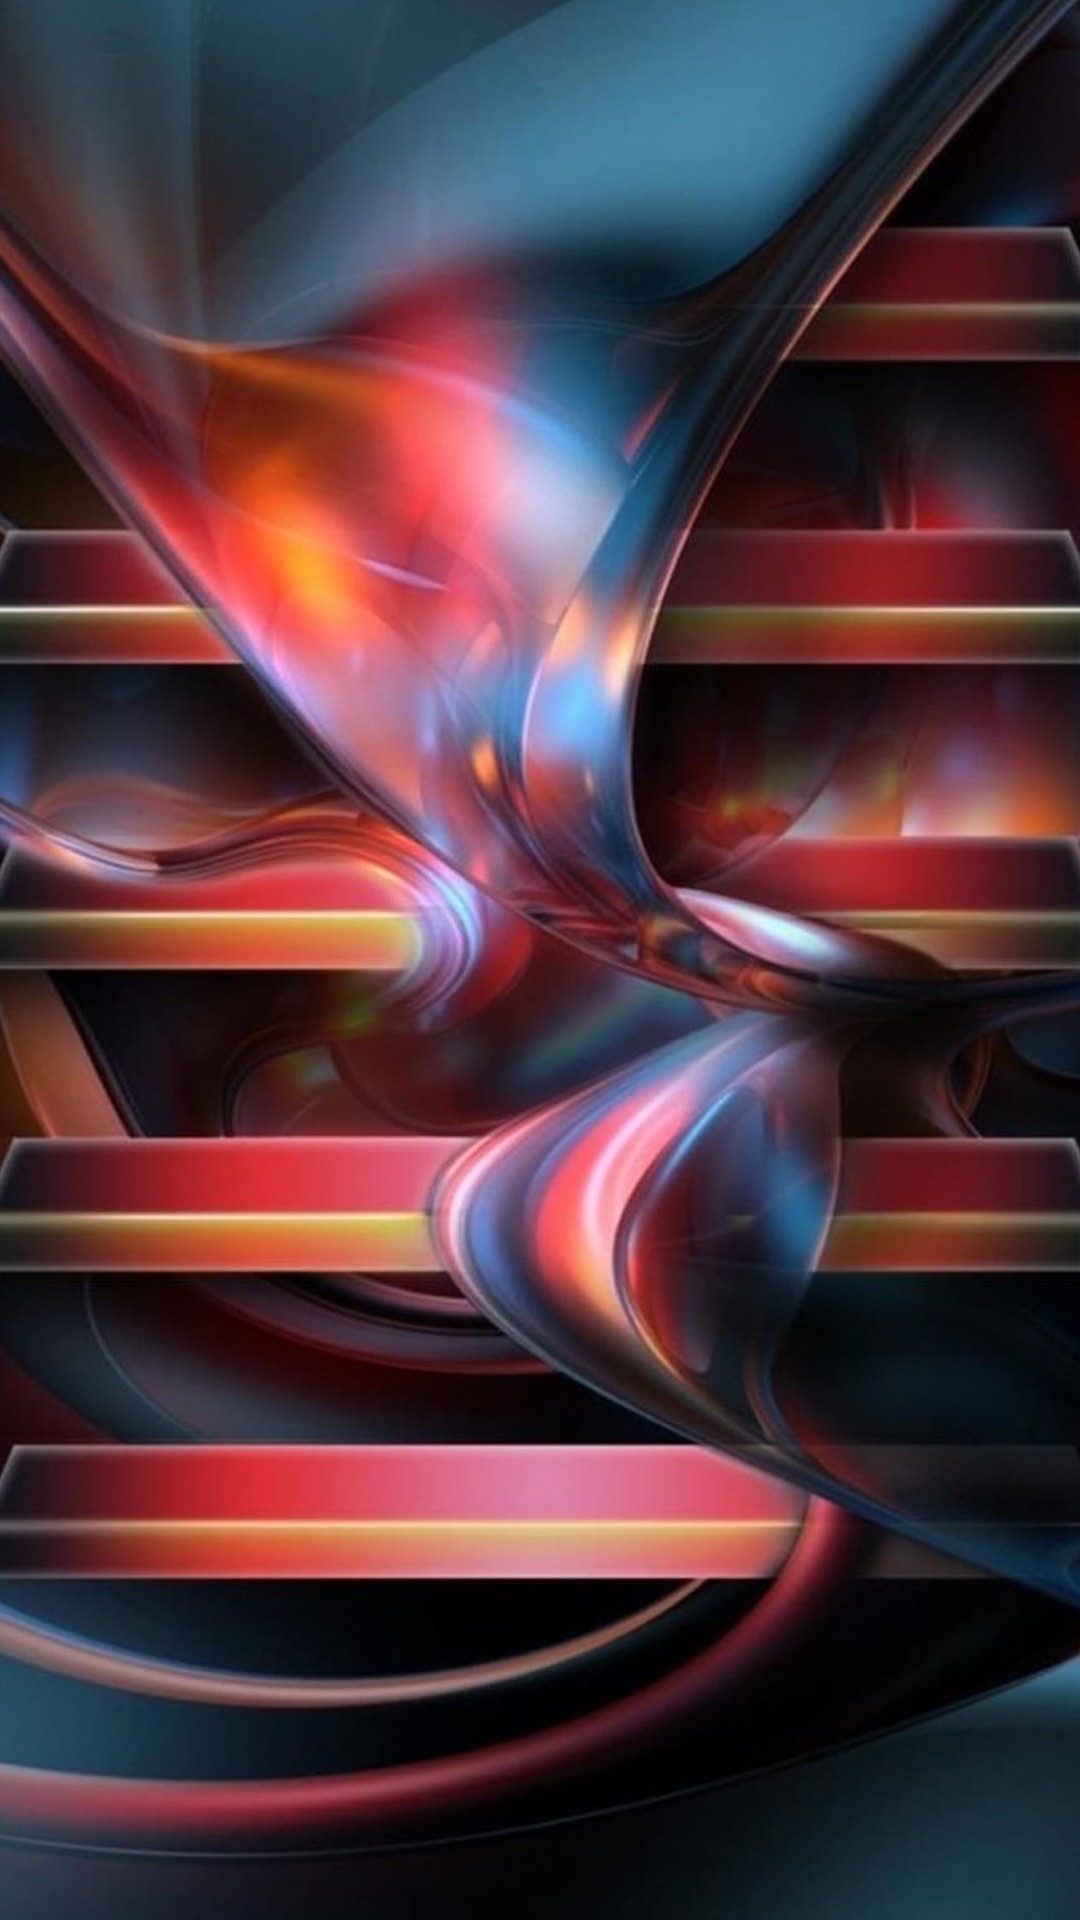 Abstract Wallpaper iPhone resolution 1080x1920